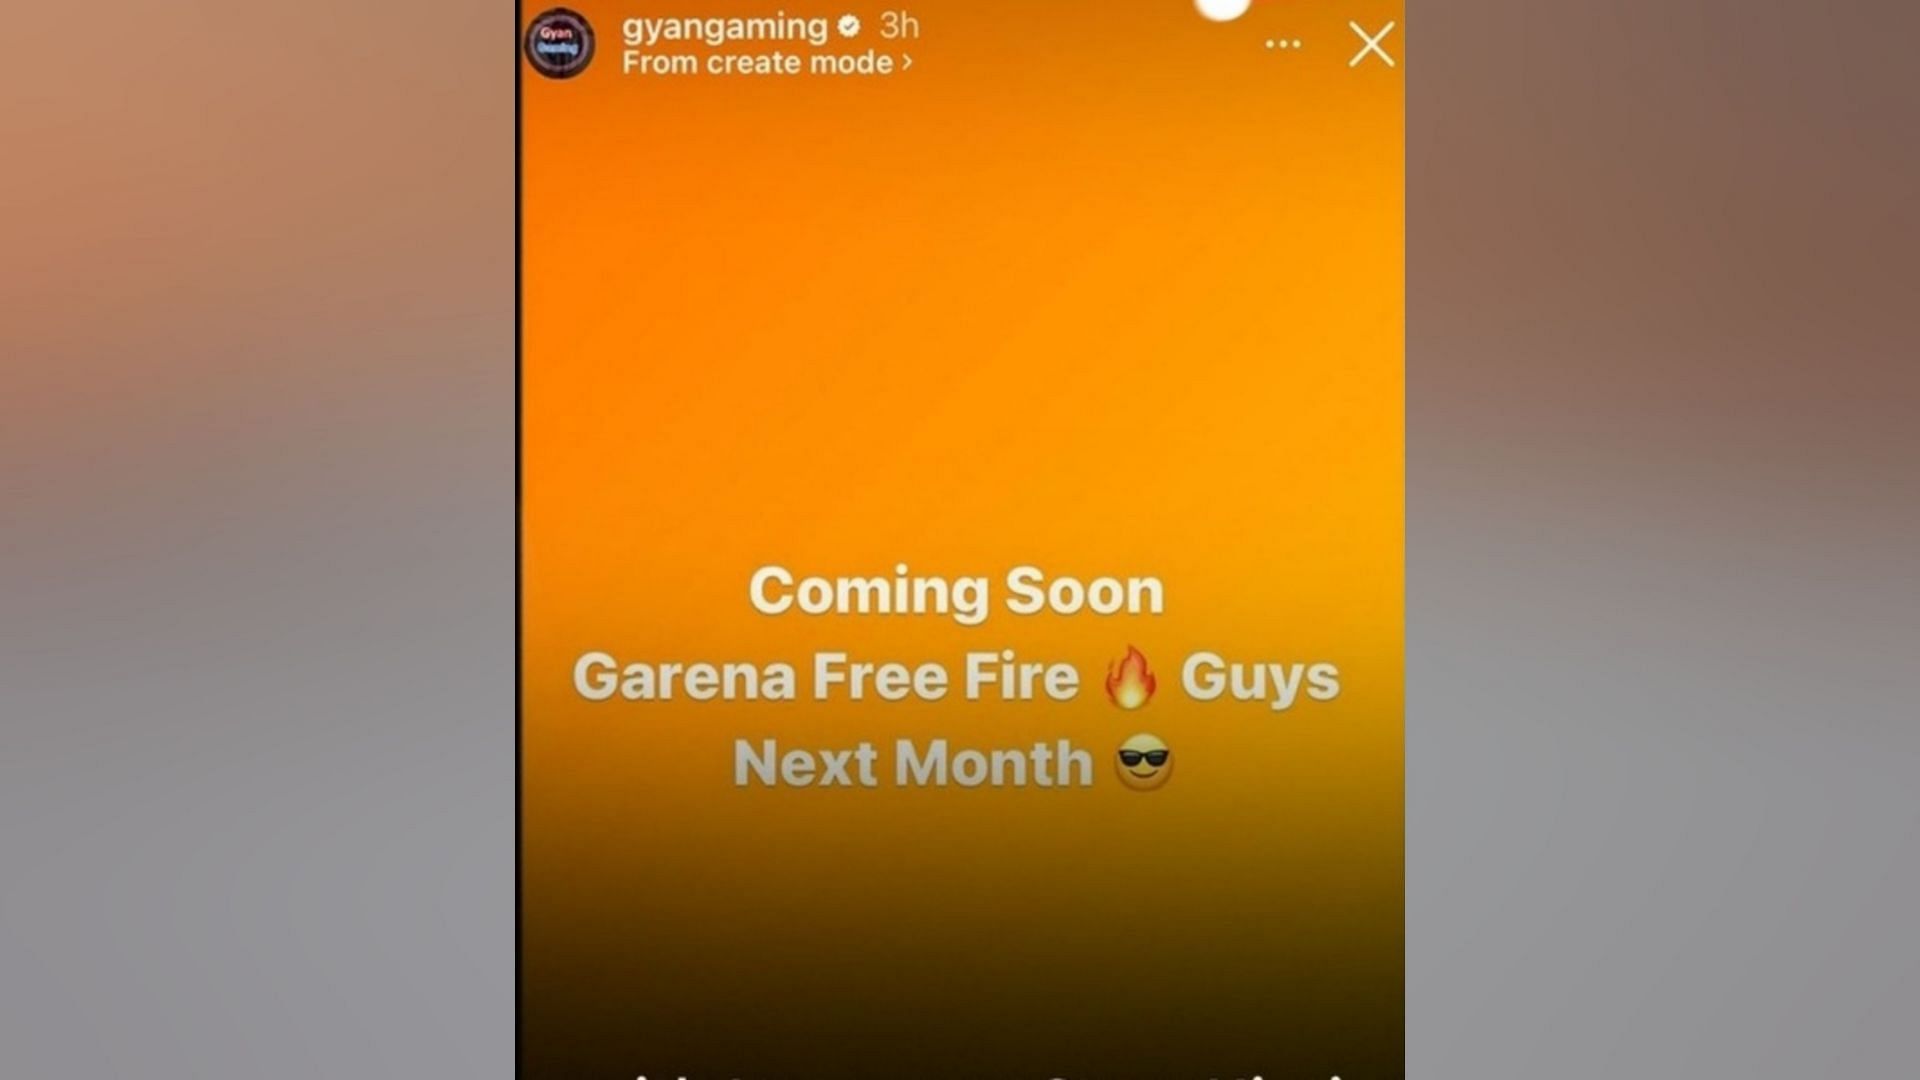 Gyan Gaming&#039;s latest Instagram story on FF comeback